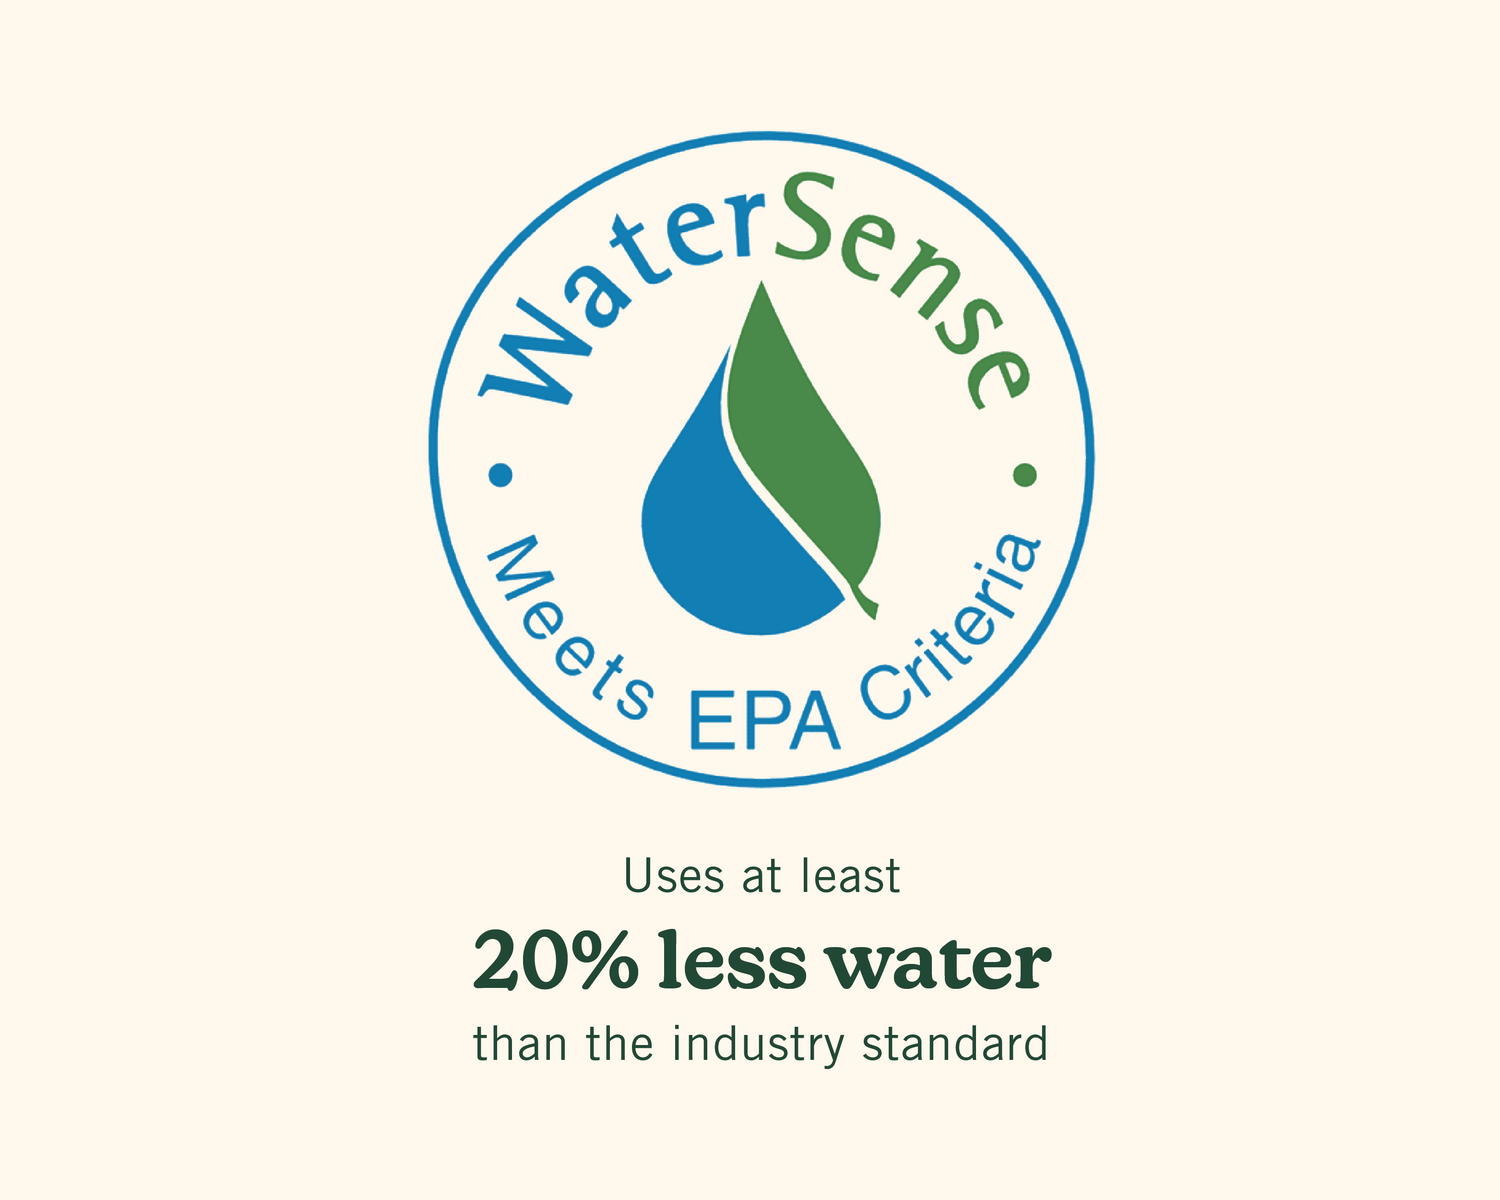 WaterSense meets EPA Criteria Seal. Uses at least 20% less water than the industry standard.